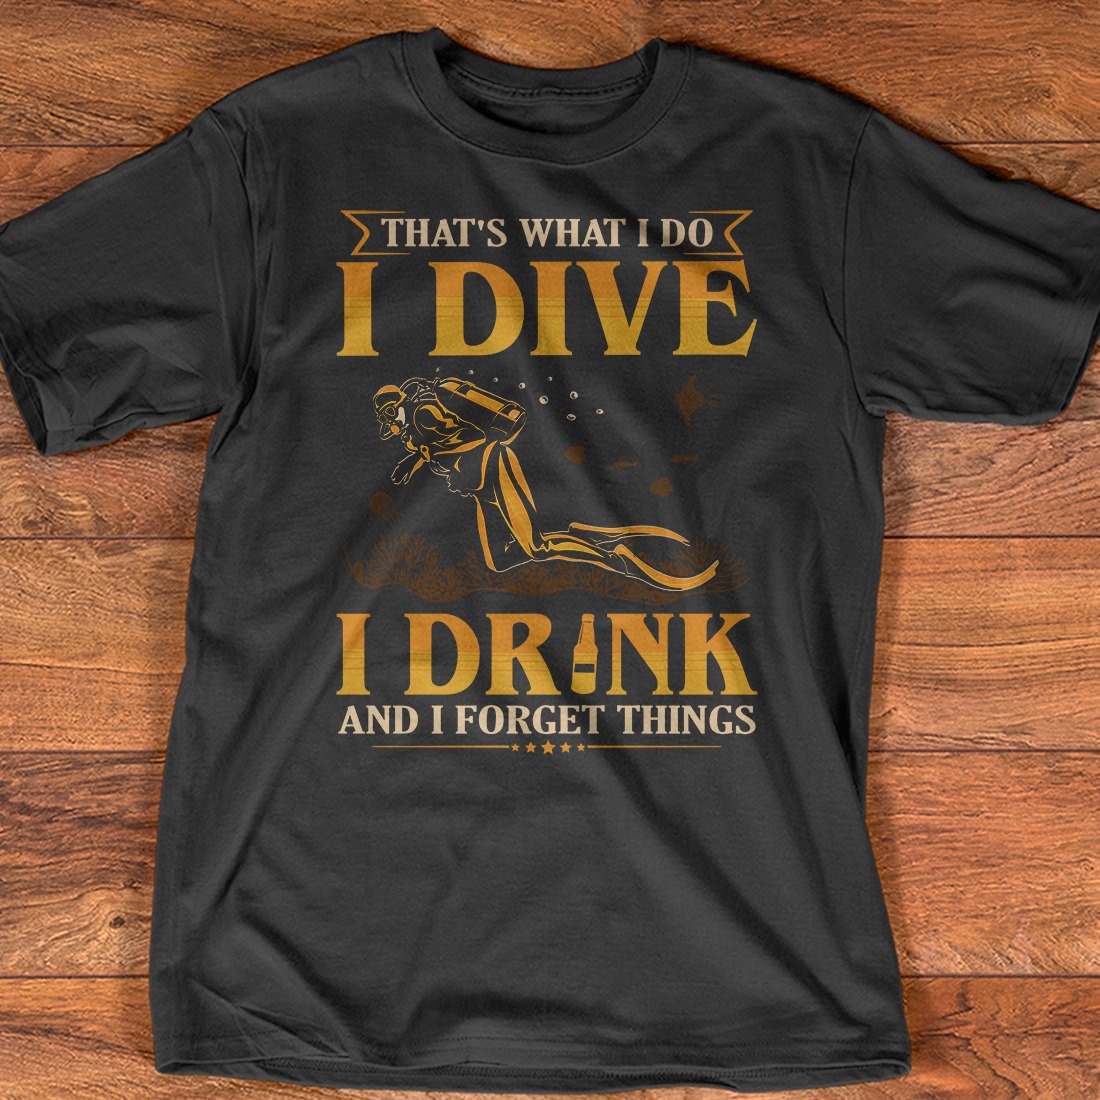 That's what I do I dive I drink and I forget things - Love diving